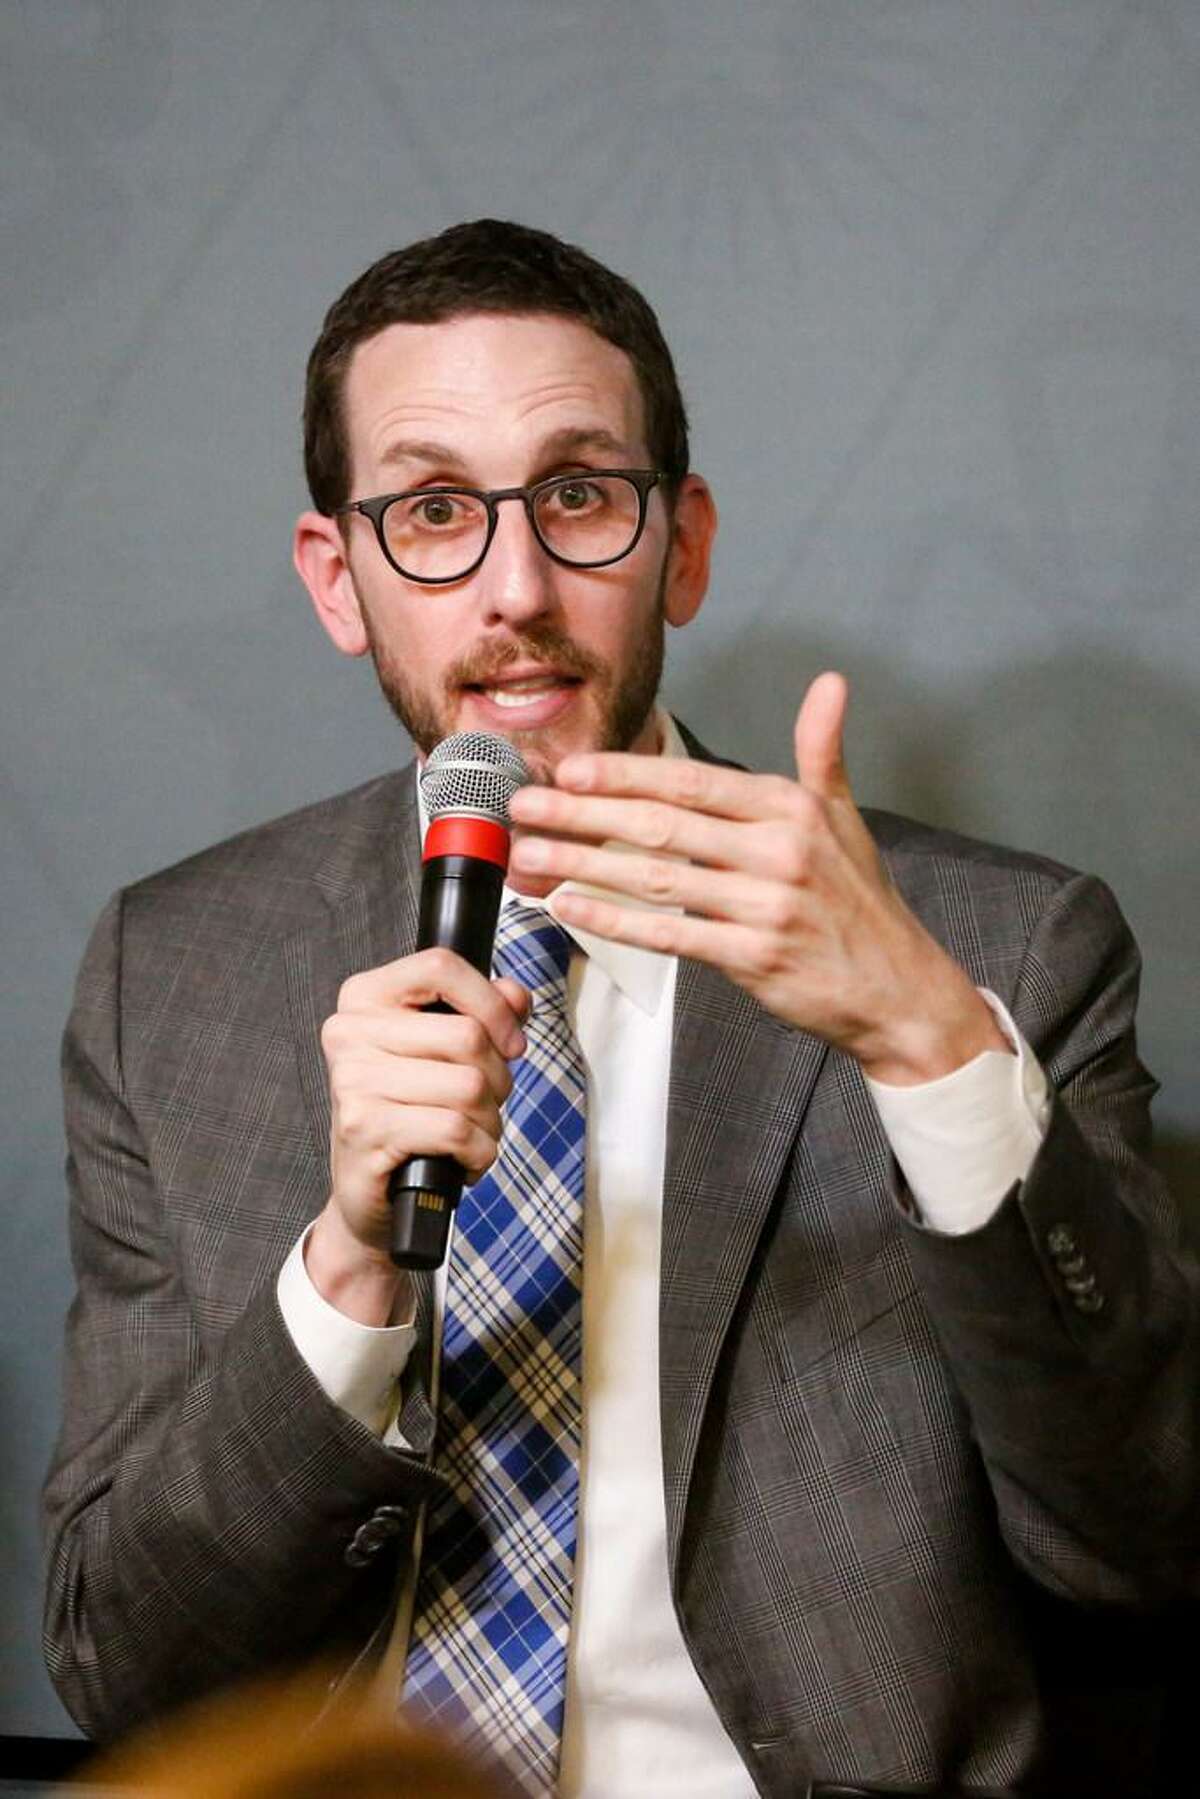 State Senator Scott Wiener speaks at a panel discussion on housing at the Yelp headquarters on Thursday, April 18, 2018 in San Francisco, California.